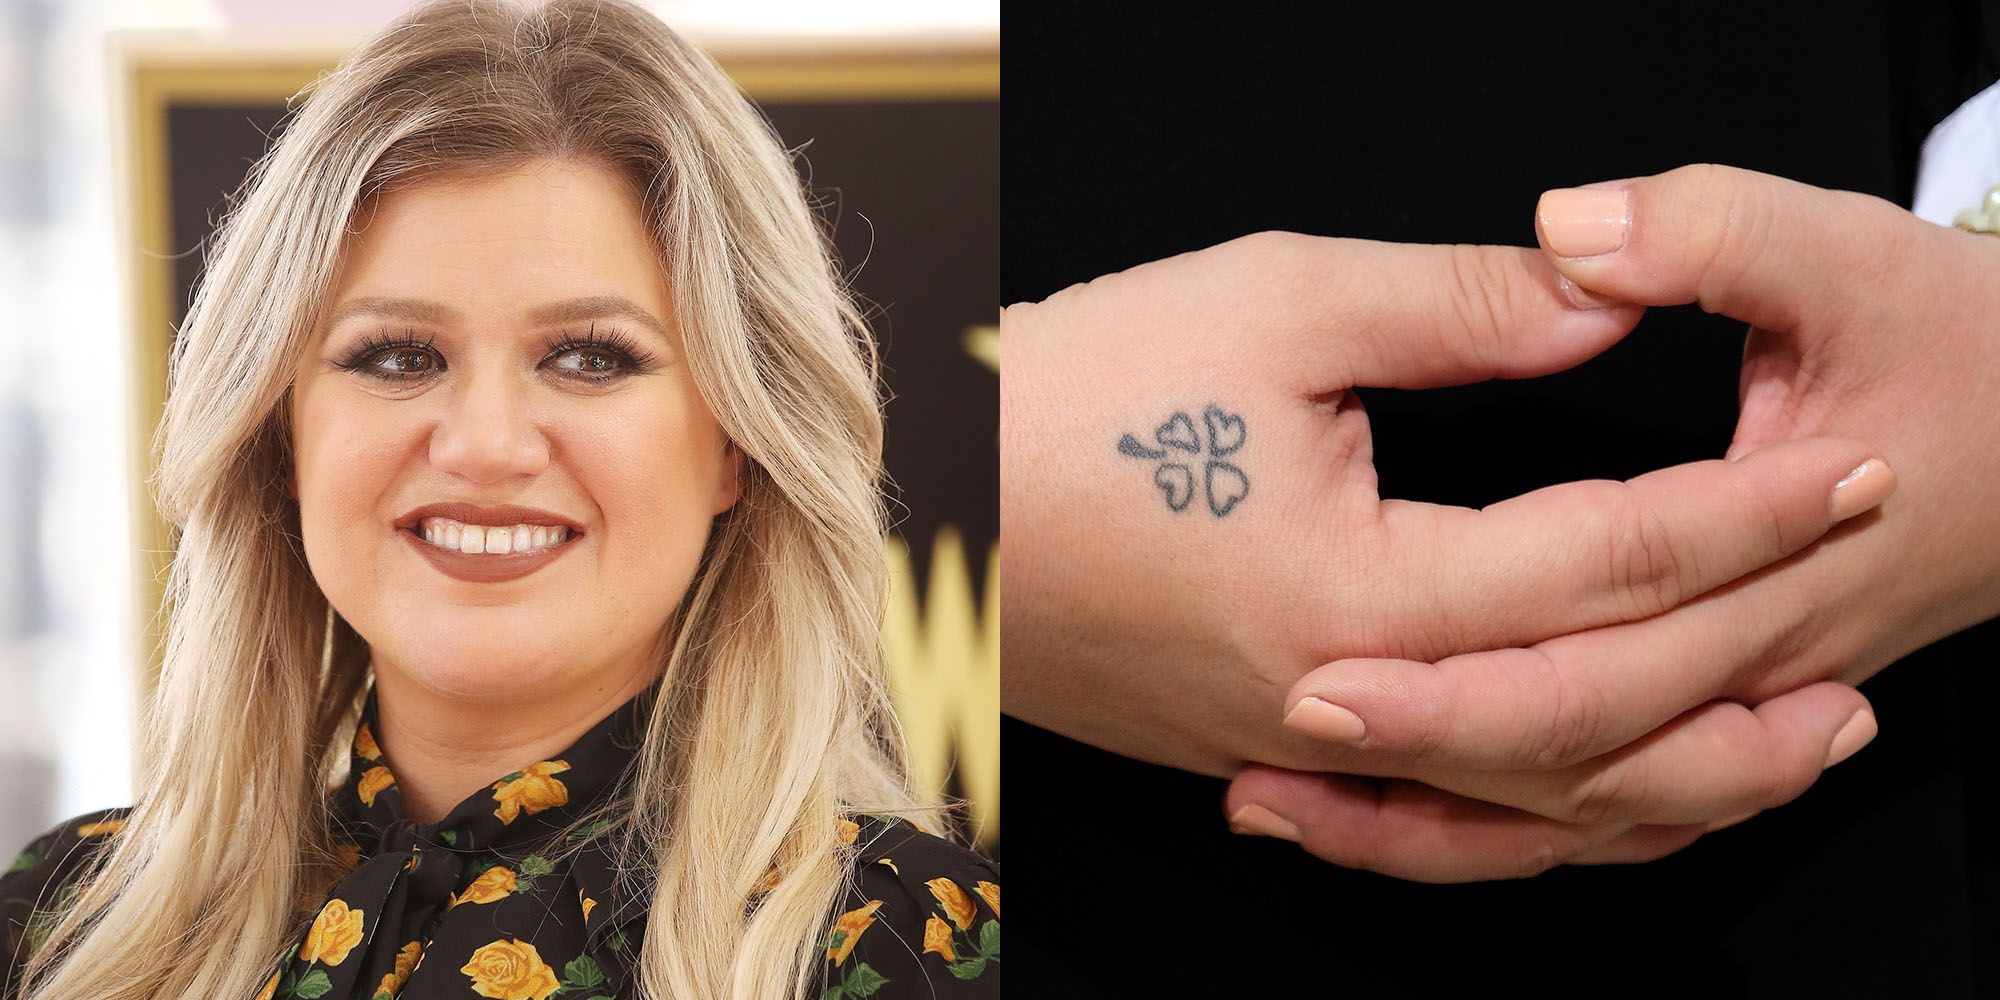 Adele gives the 1st detailed look at her Saturn tattoo while celebrating  her 33rd birthday on social media - Yahoo Sports